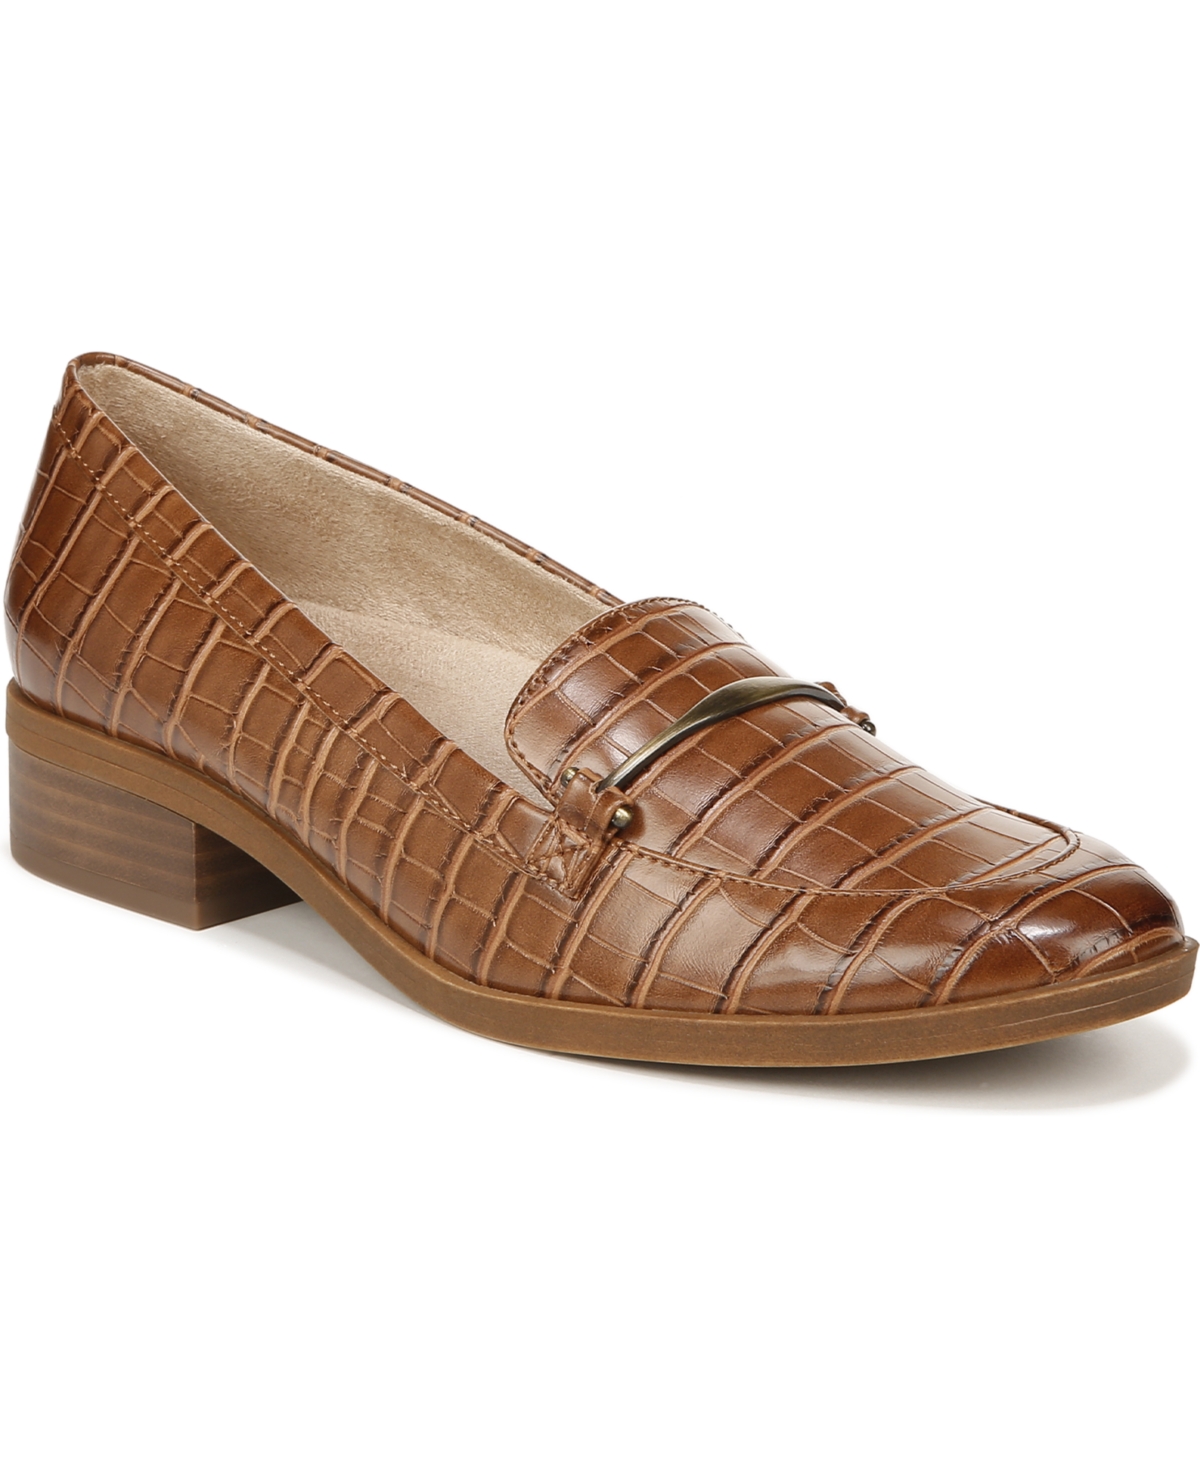 Ridley Loafers - Cinnamon Smooth Faux Leather